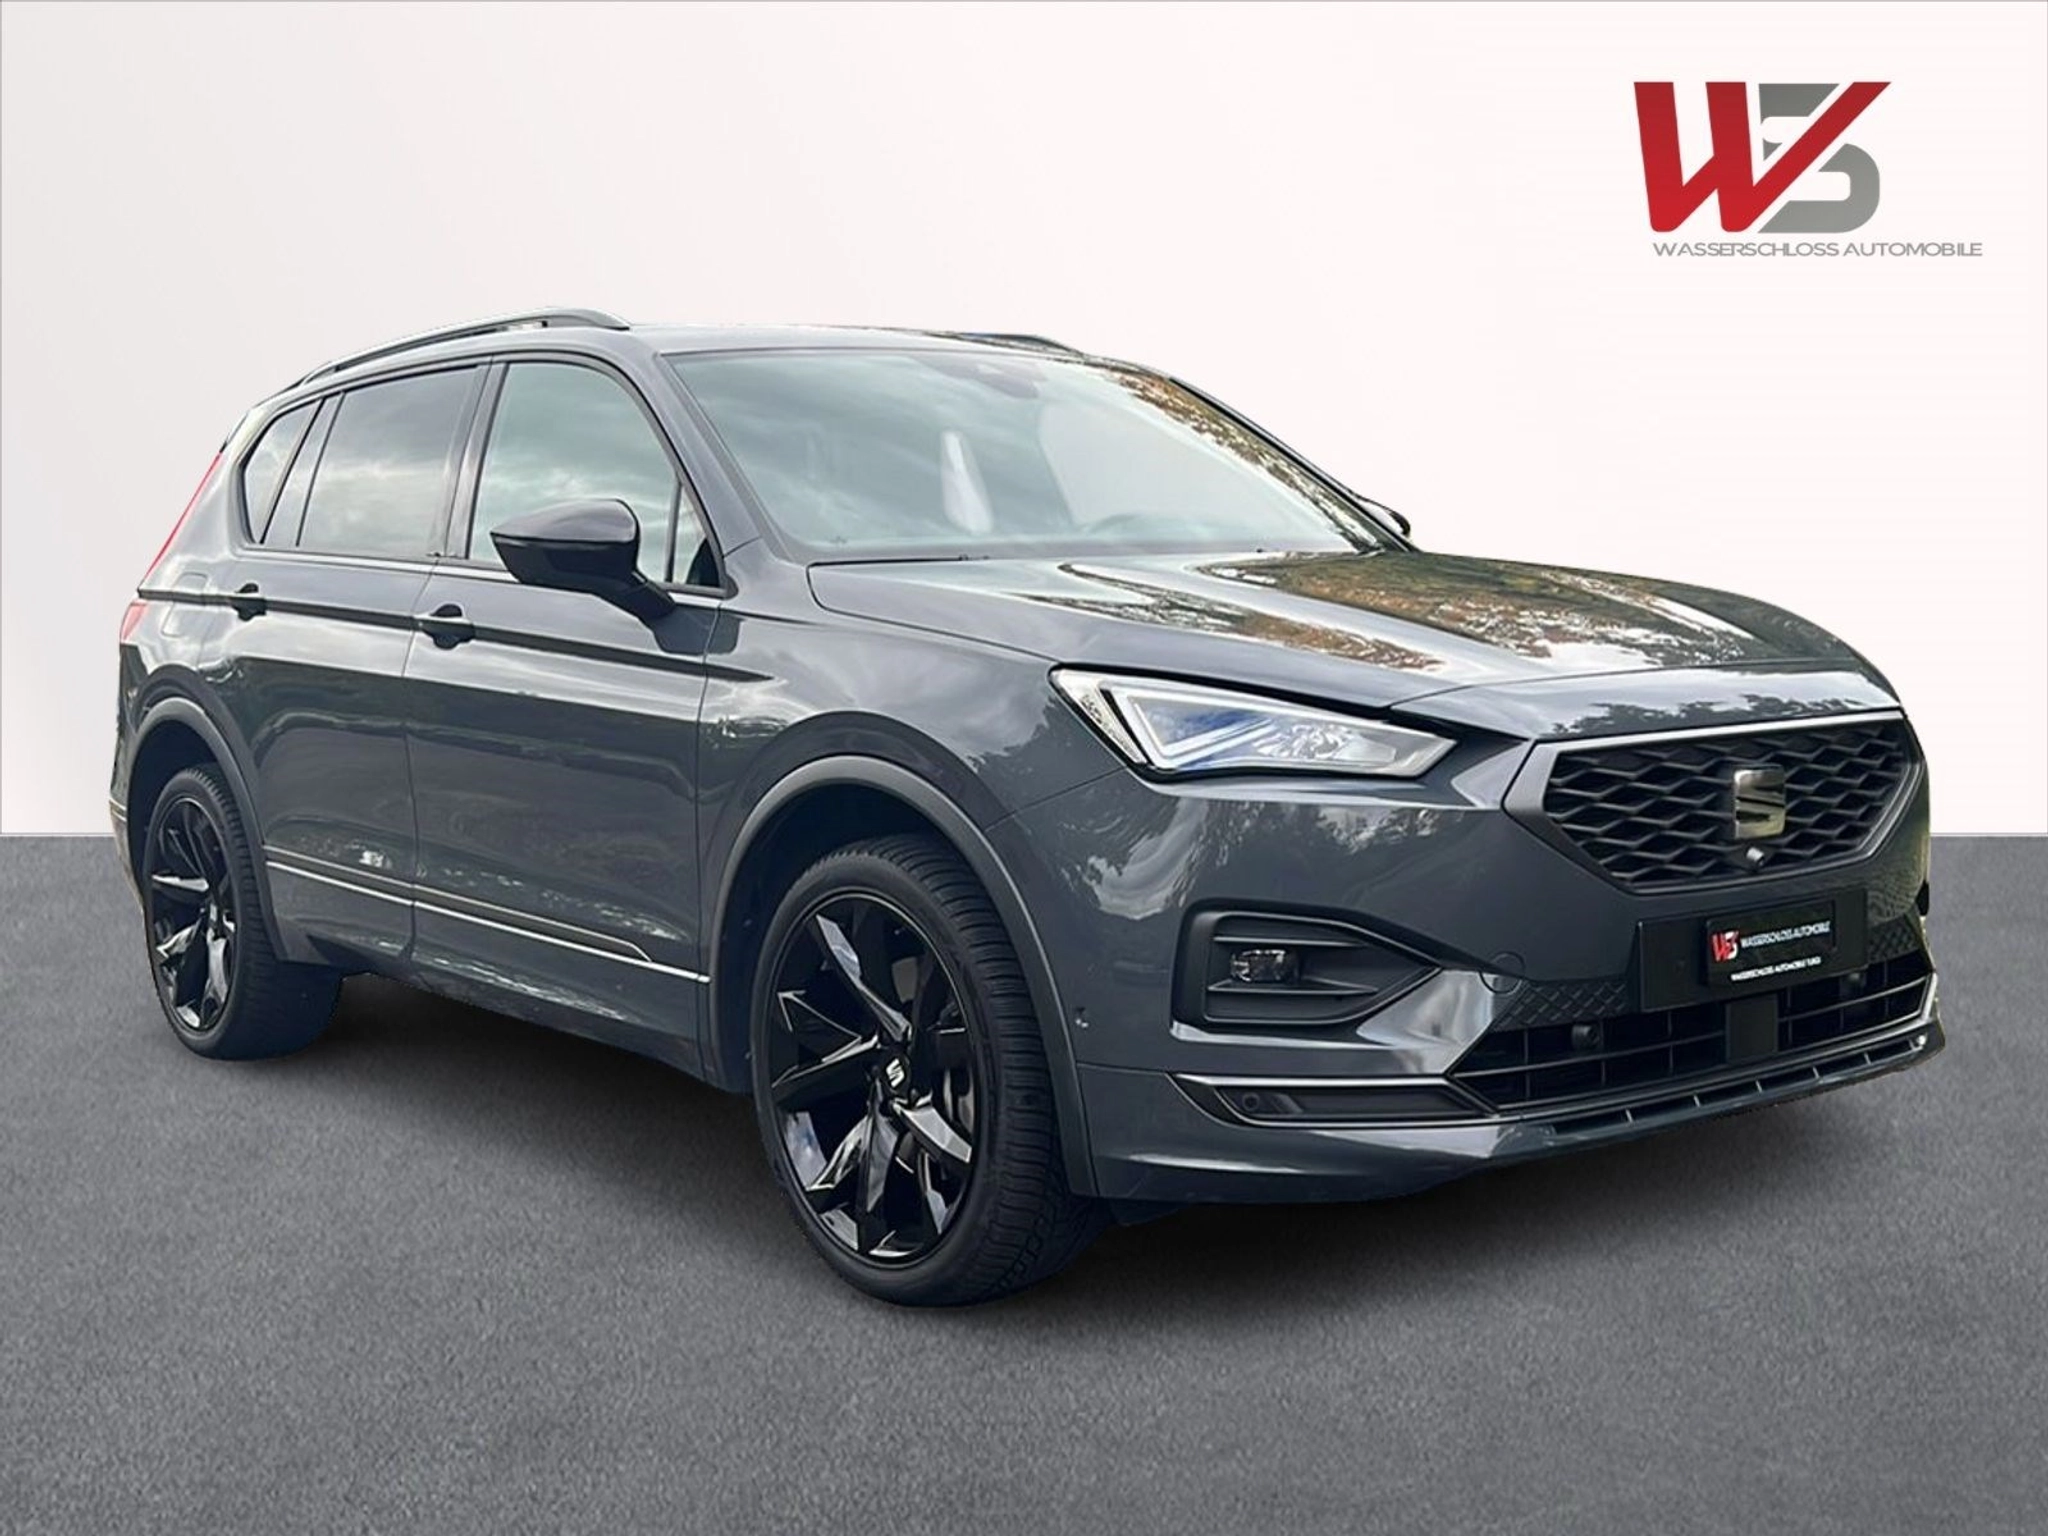 SEAT Tarraco Leasing in Switzerland from CHF 210 